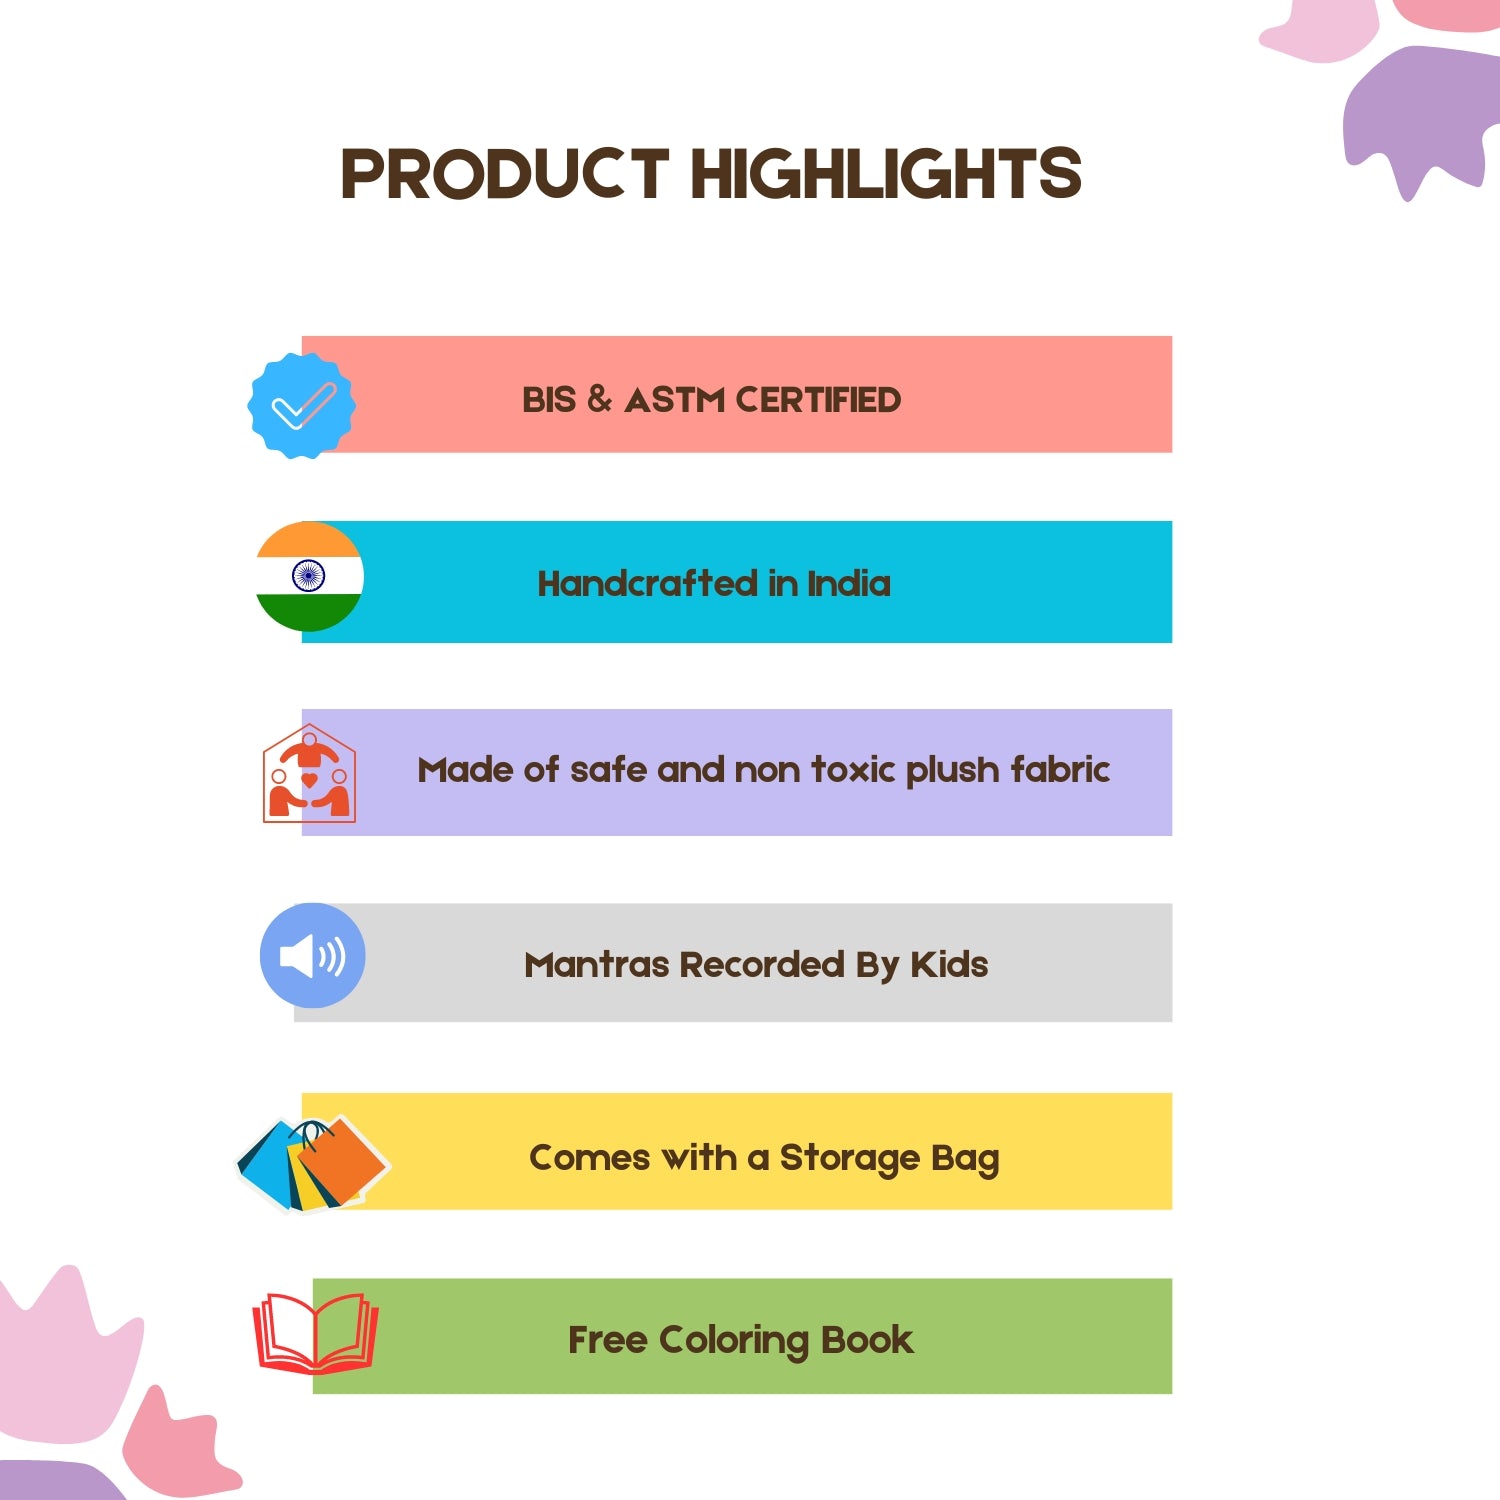 Product highlights for bundle